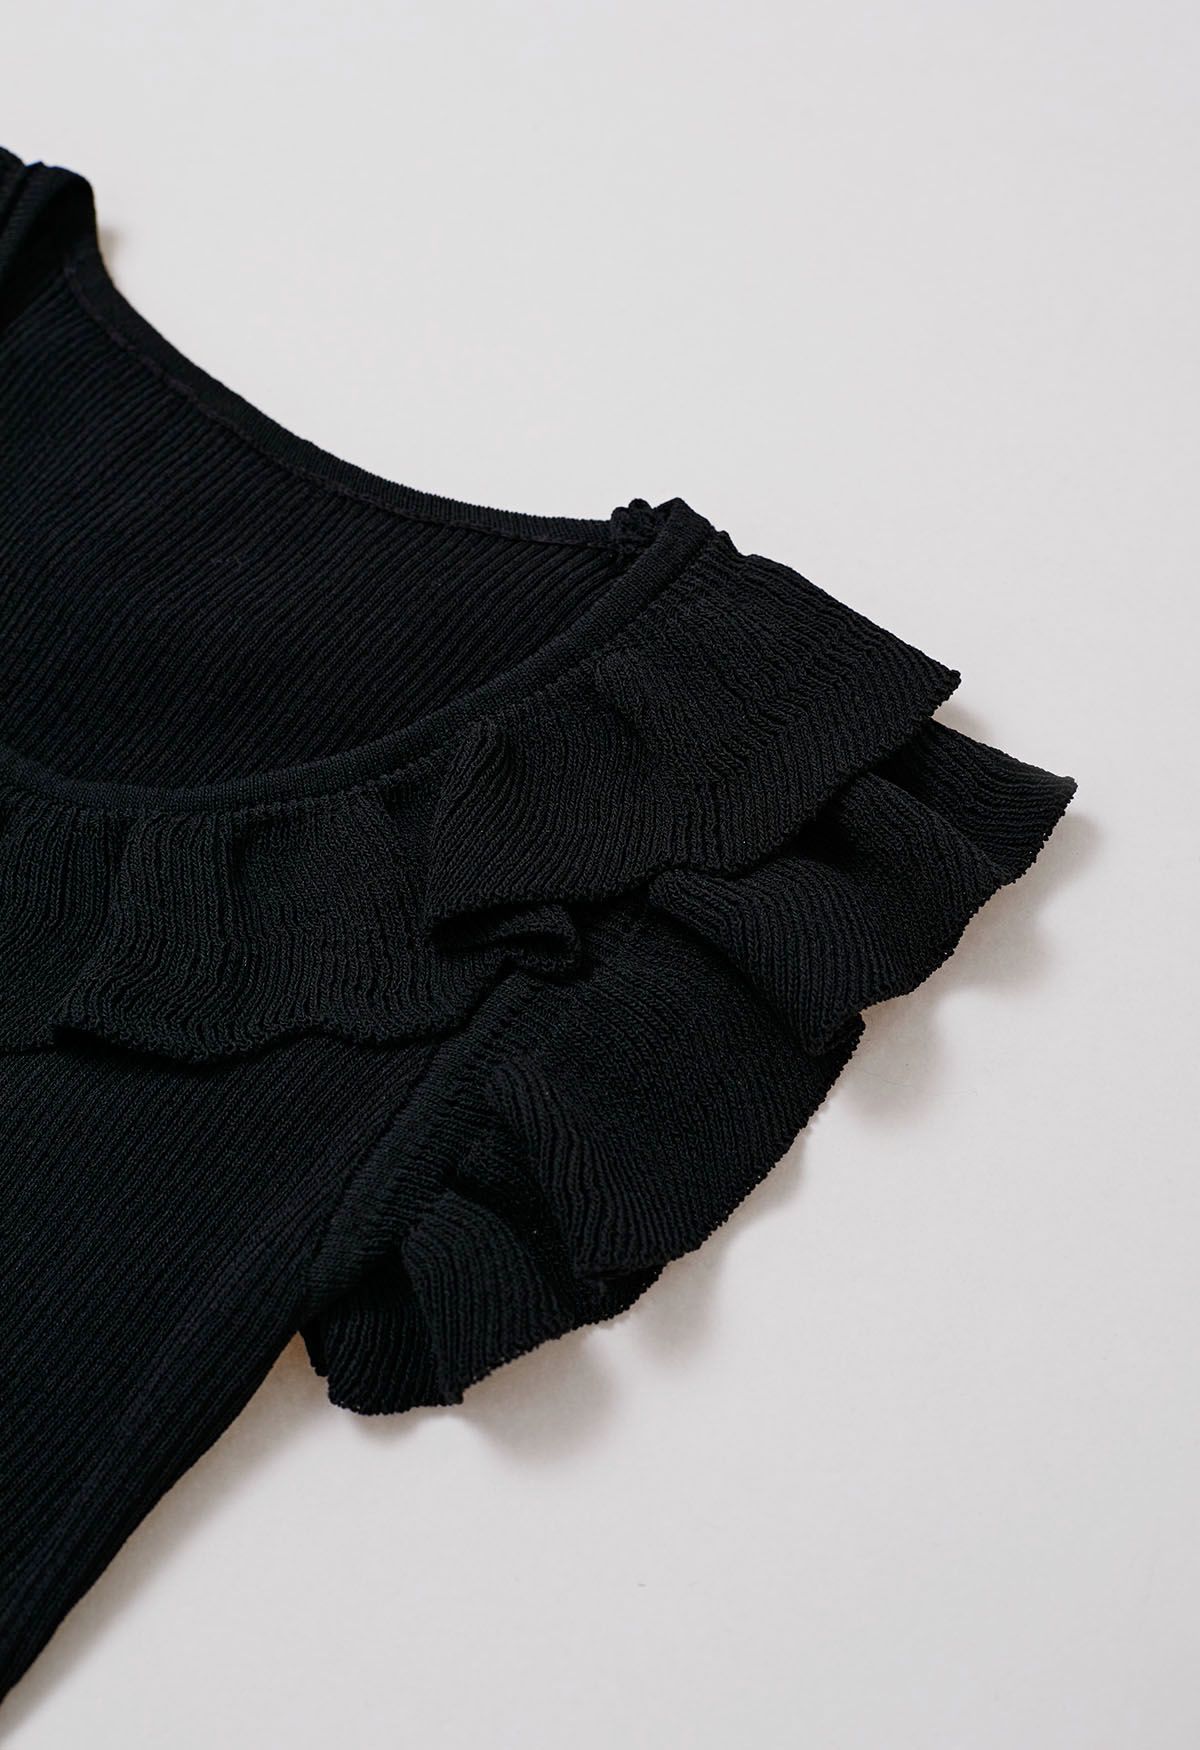 Ethereal Ruffle Sleeveless Knit Top in Black